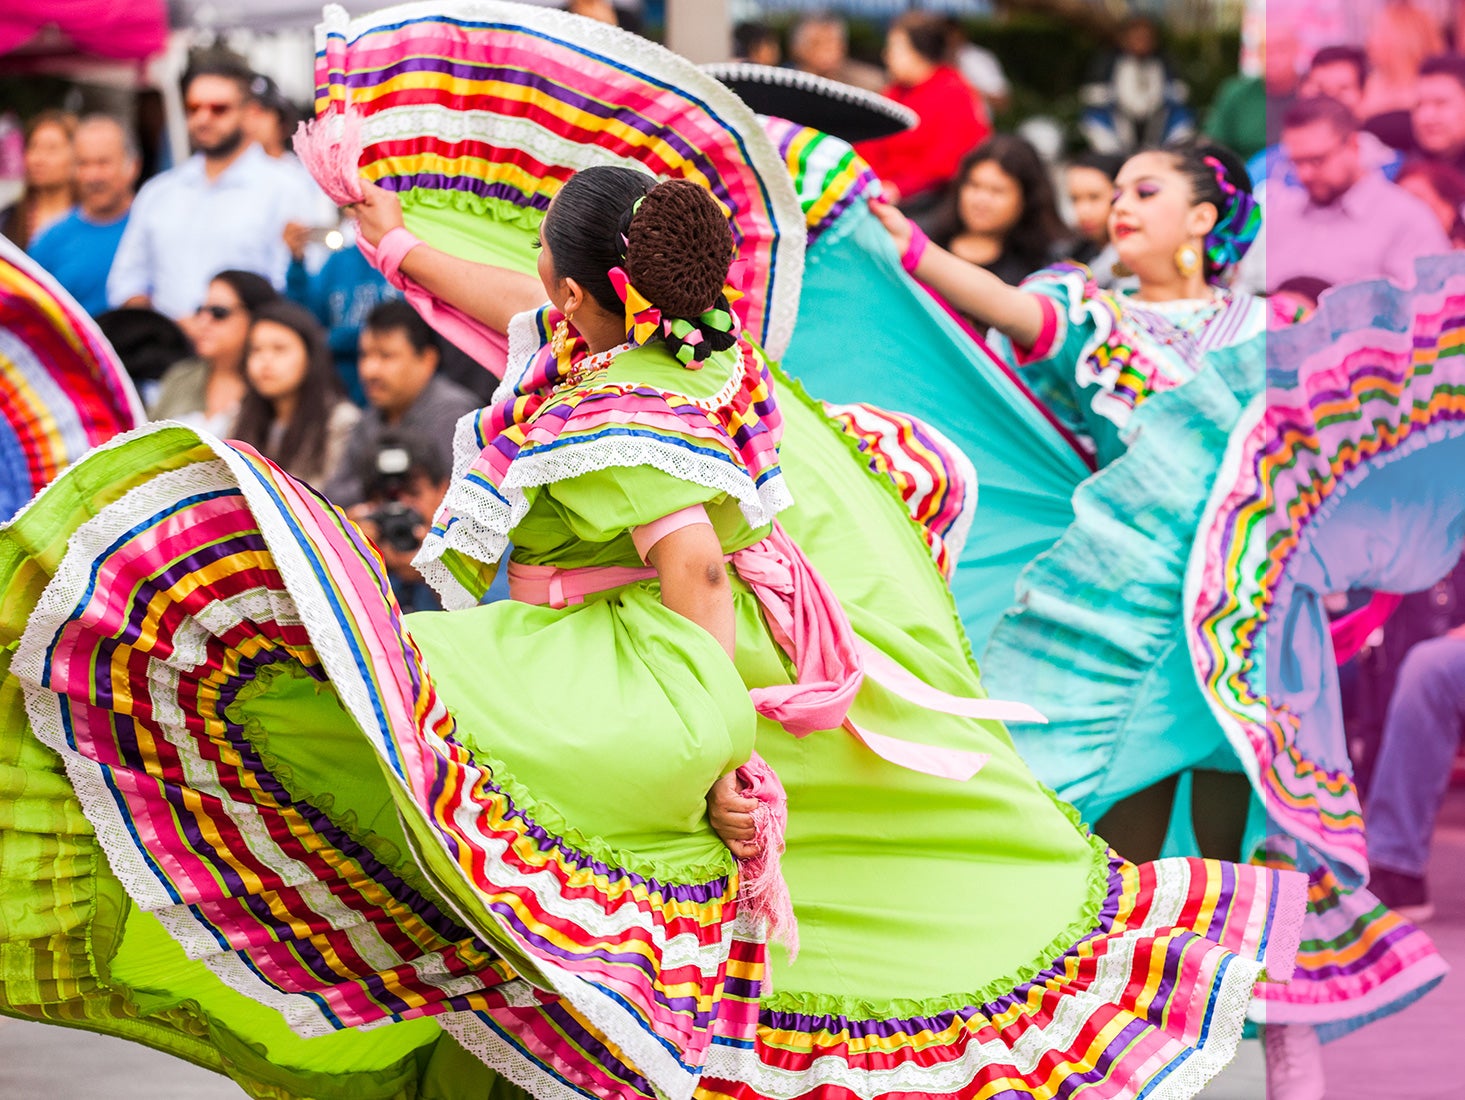 Colorfully dressed flamenco dancers perform before a crowd in downtown L.A.